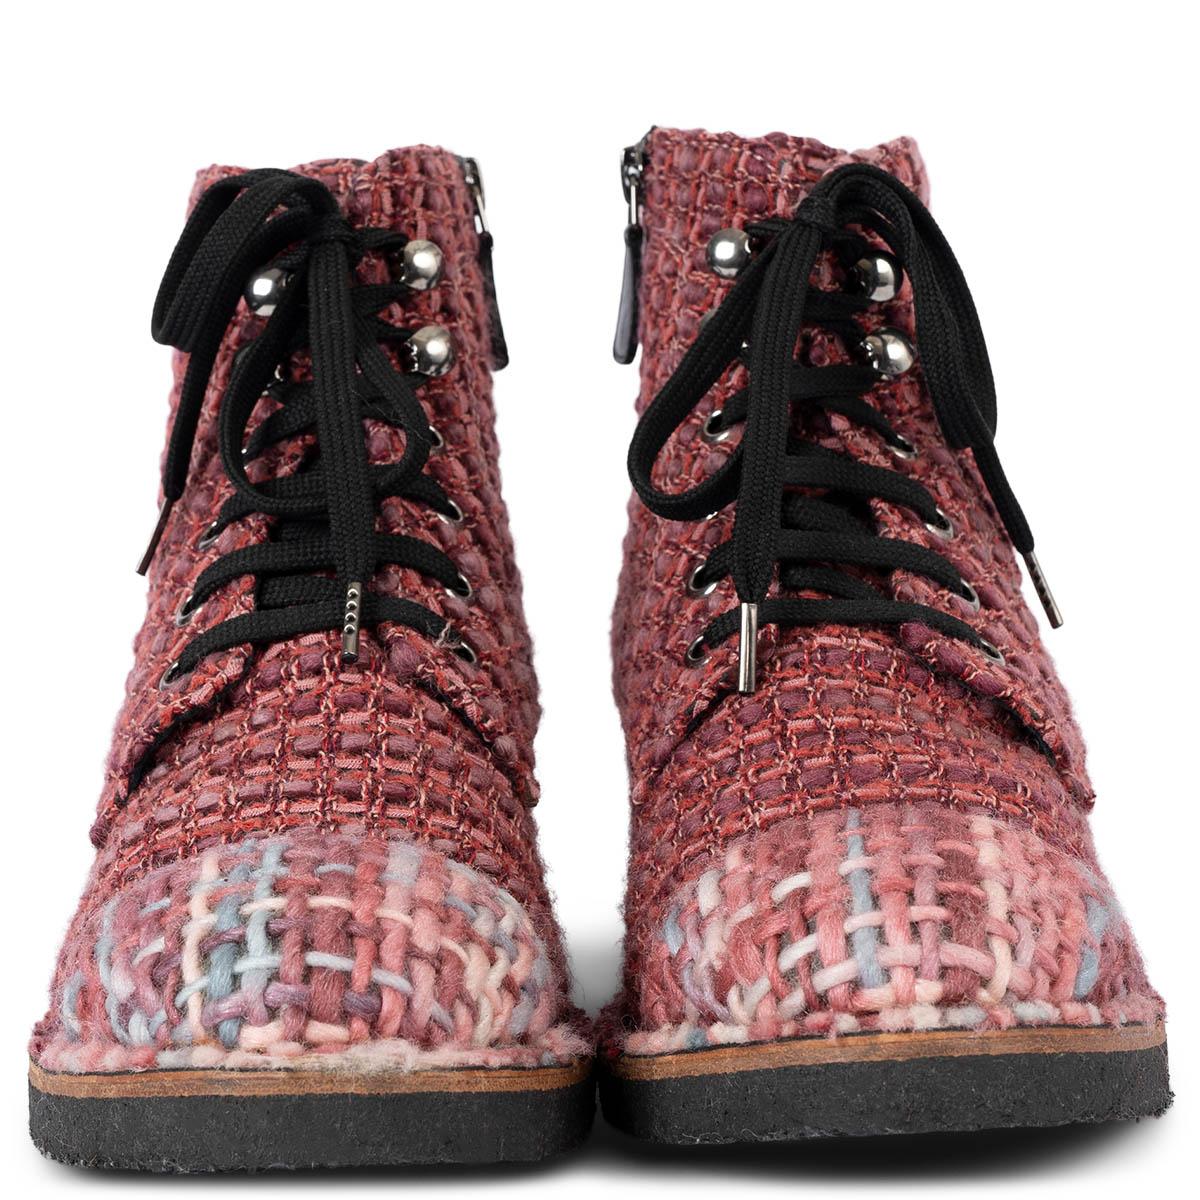 100% authentic Chanel tweed lace-up ankle boots in raspberry and red tweed featuring classic cap toe in rose pink, lilac and light blue chunky knit wool set on black crepe sole. Have been worn and are in excellent condition. 

2014